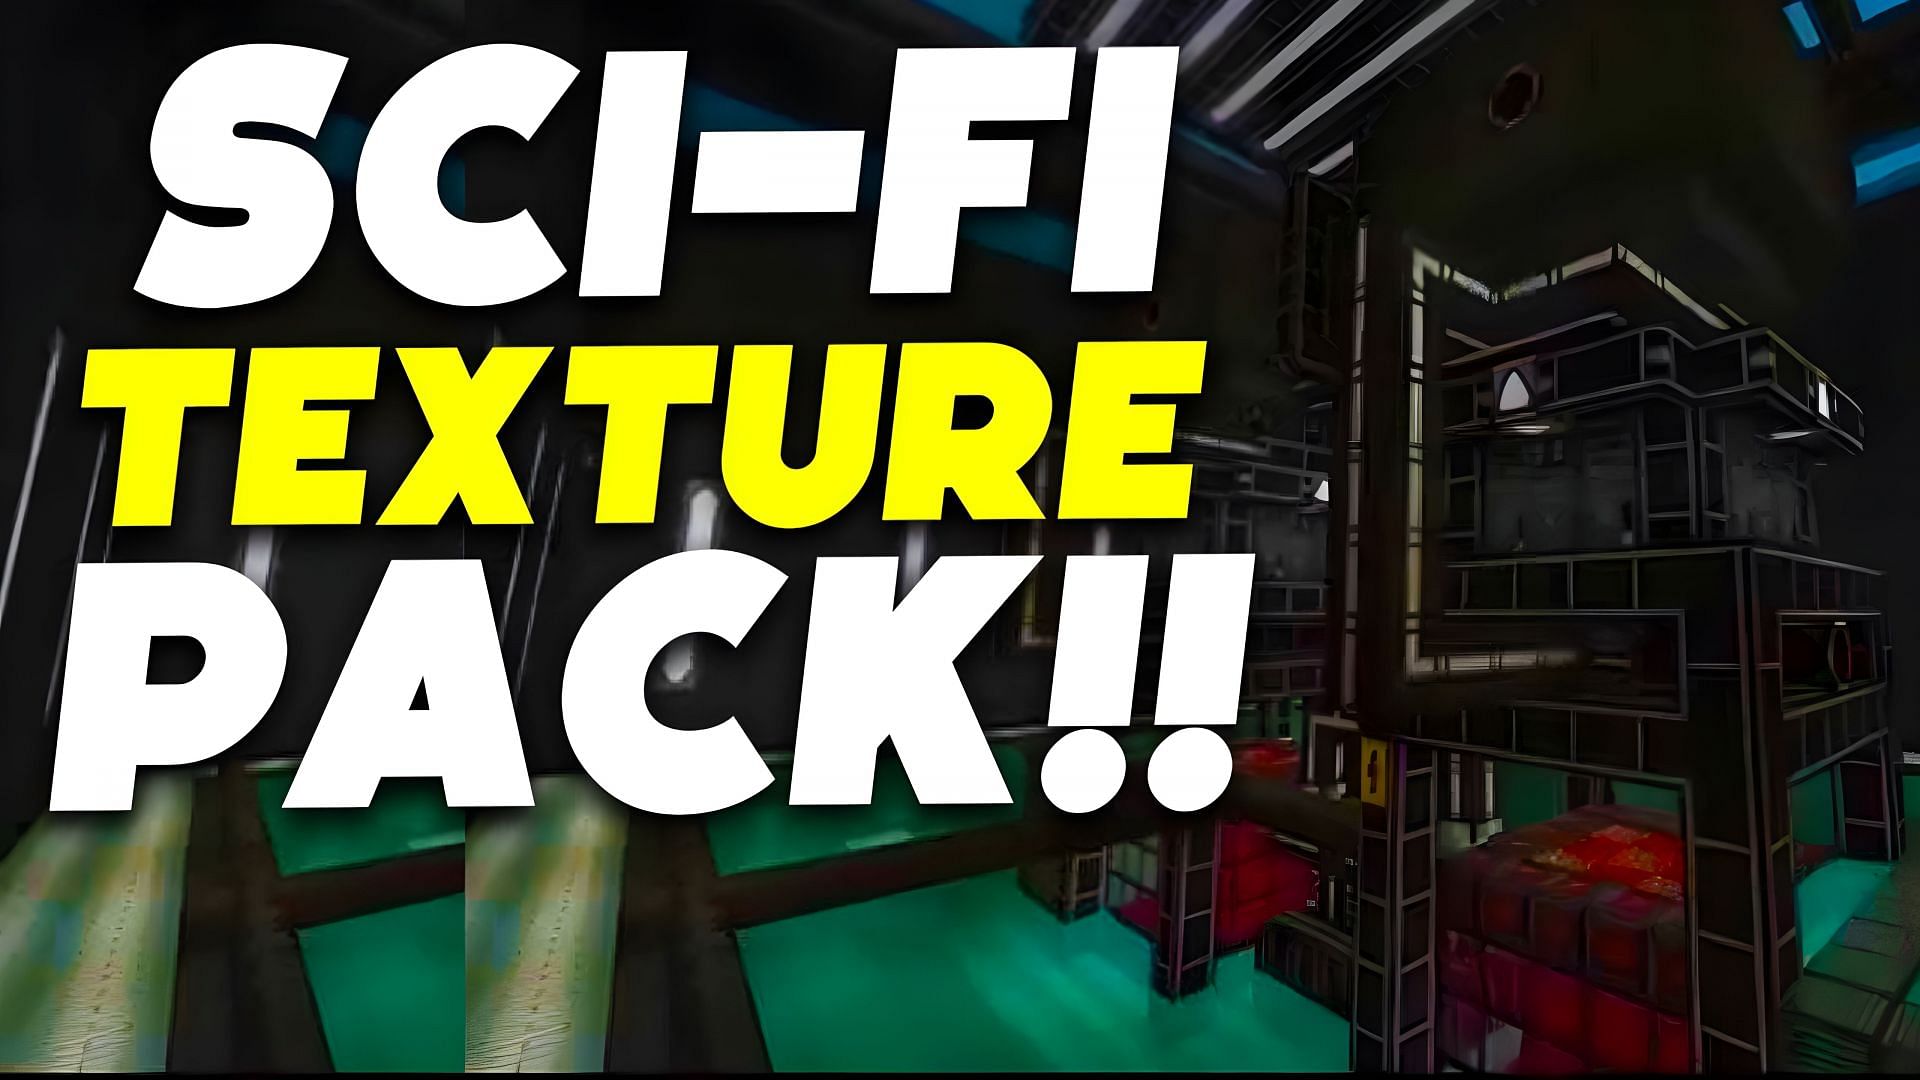 Minecraft Sci-Fi texture packs can be so cool (Image via Youtube/Zesty Craft)